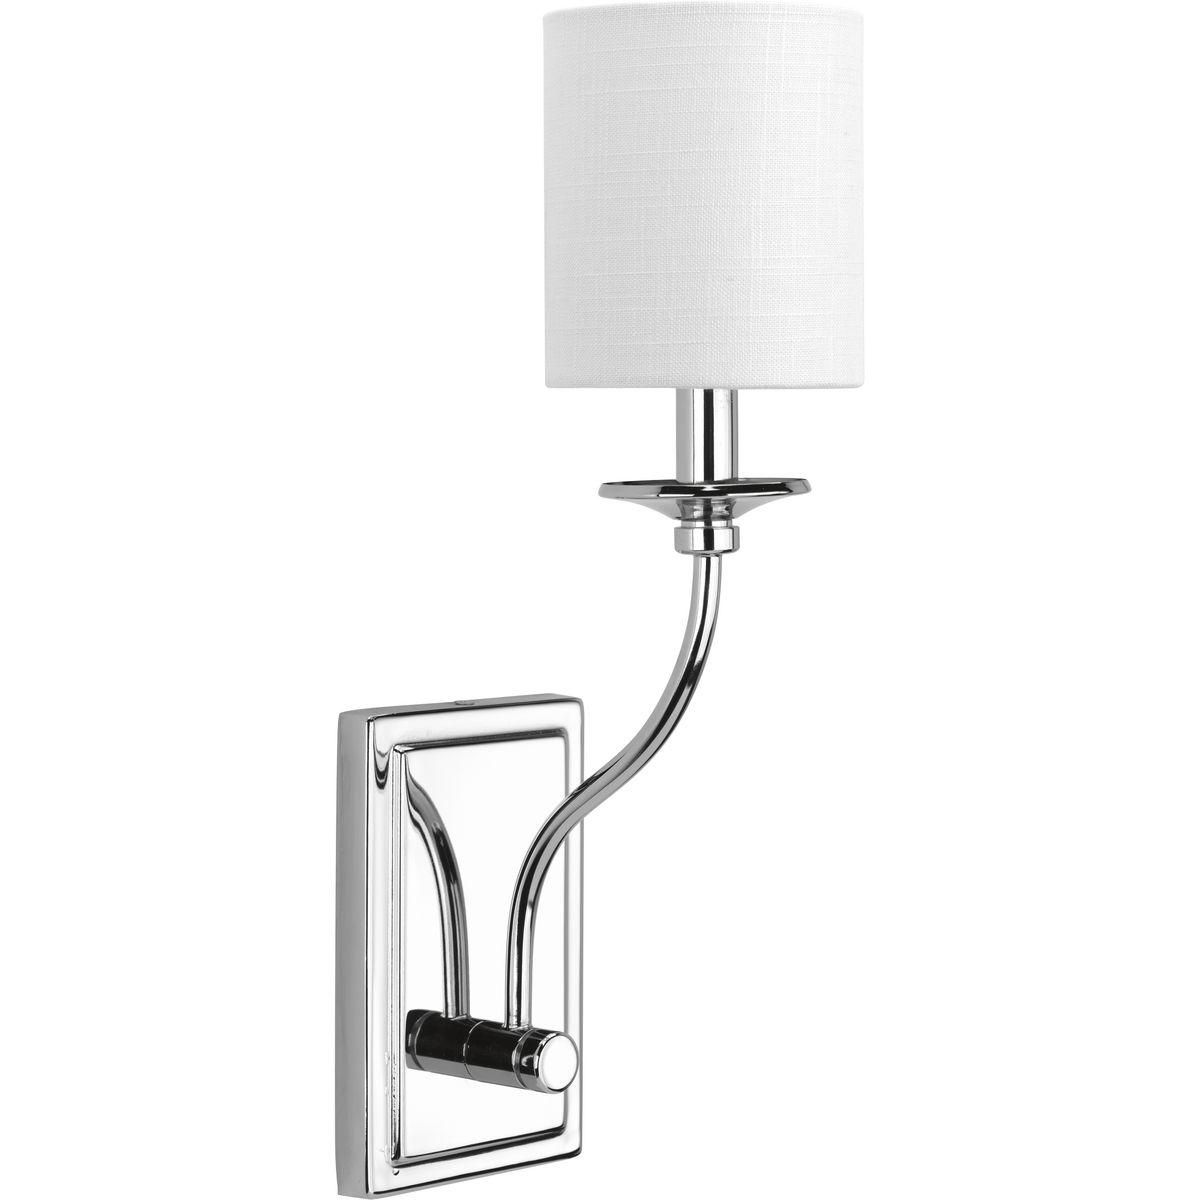 Hubbell P710018-015 Bonita sconces have a traditional elegance to complement luxurious living with an understated beauty. Crisp metal fittings support a graceful frame and candle topped with a Summer Linen shade. One-Light wall sconce. Polished Chrome finish.  ; Crisp metal 